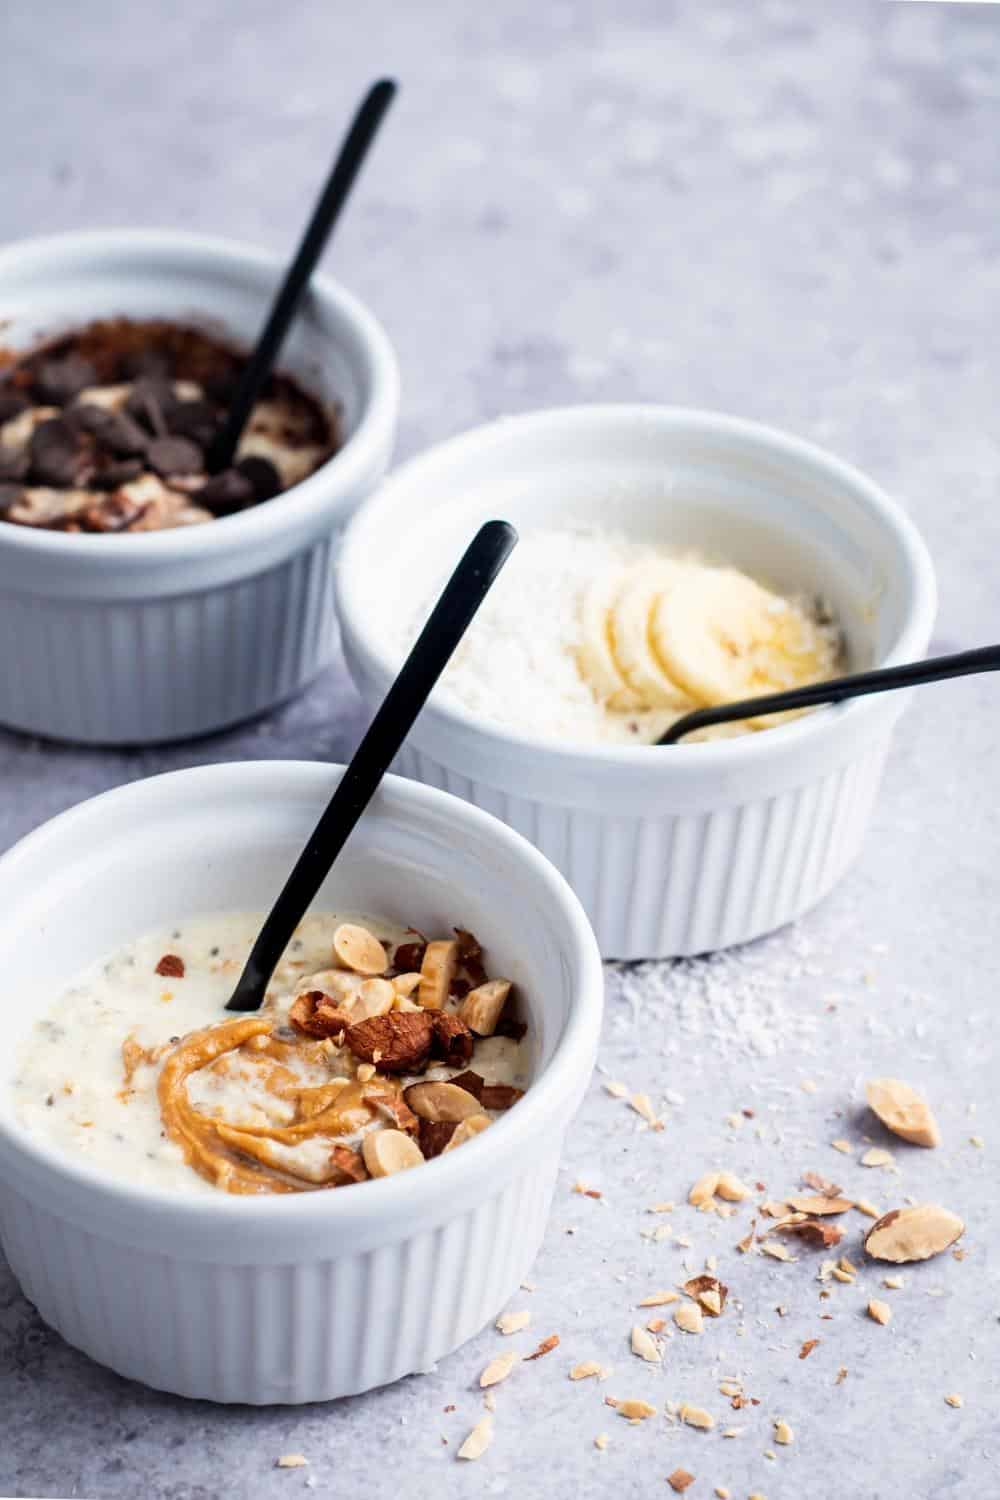 Nuts and peanut butter on top of overnight oats in a white bowl. Behind that is sliced bananas and shredded coconut in a white bowl. And behind that is another bowl of overnight oats